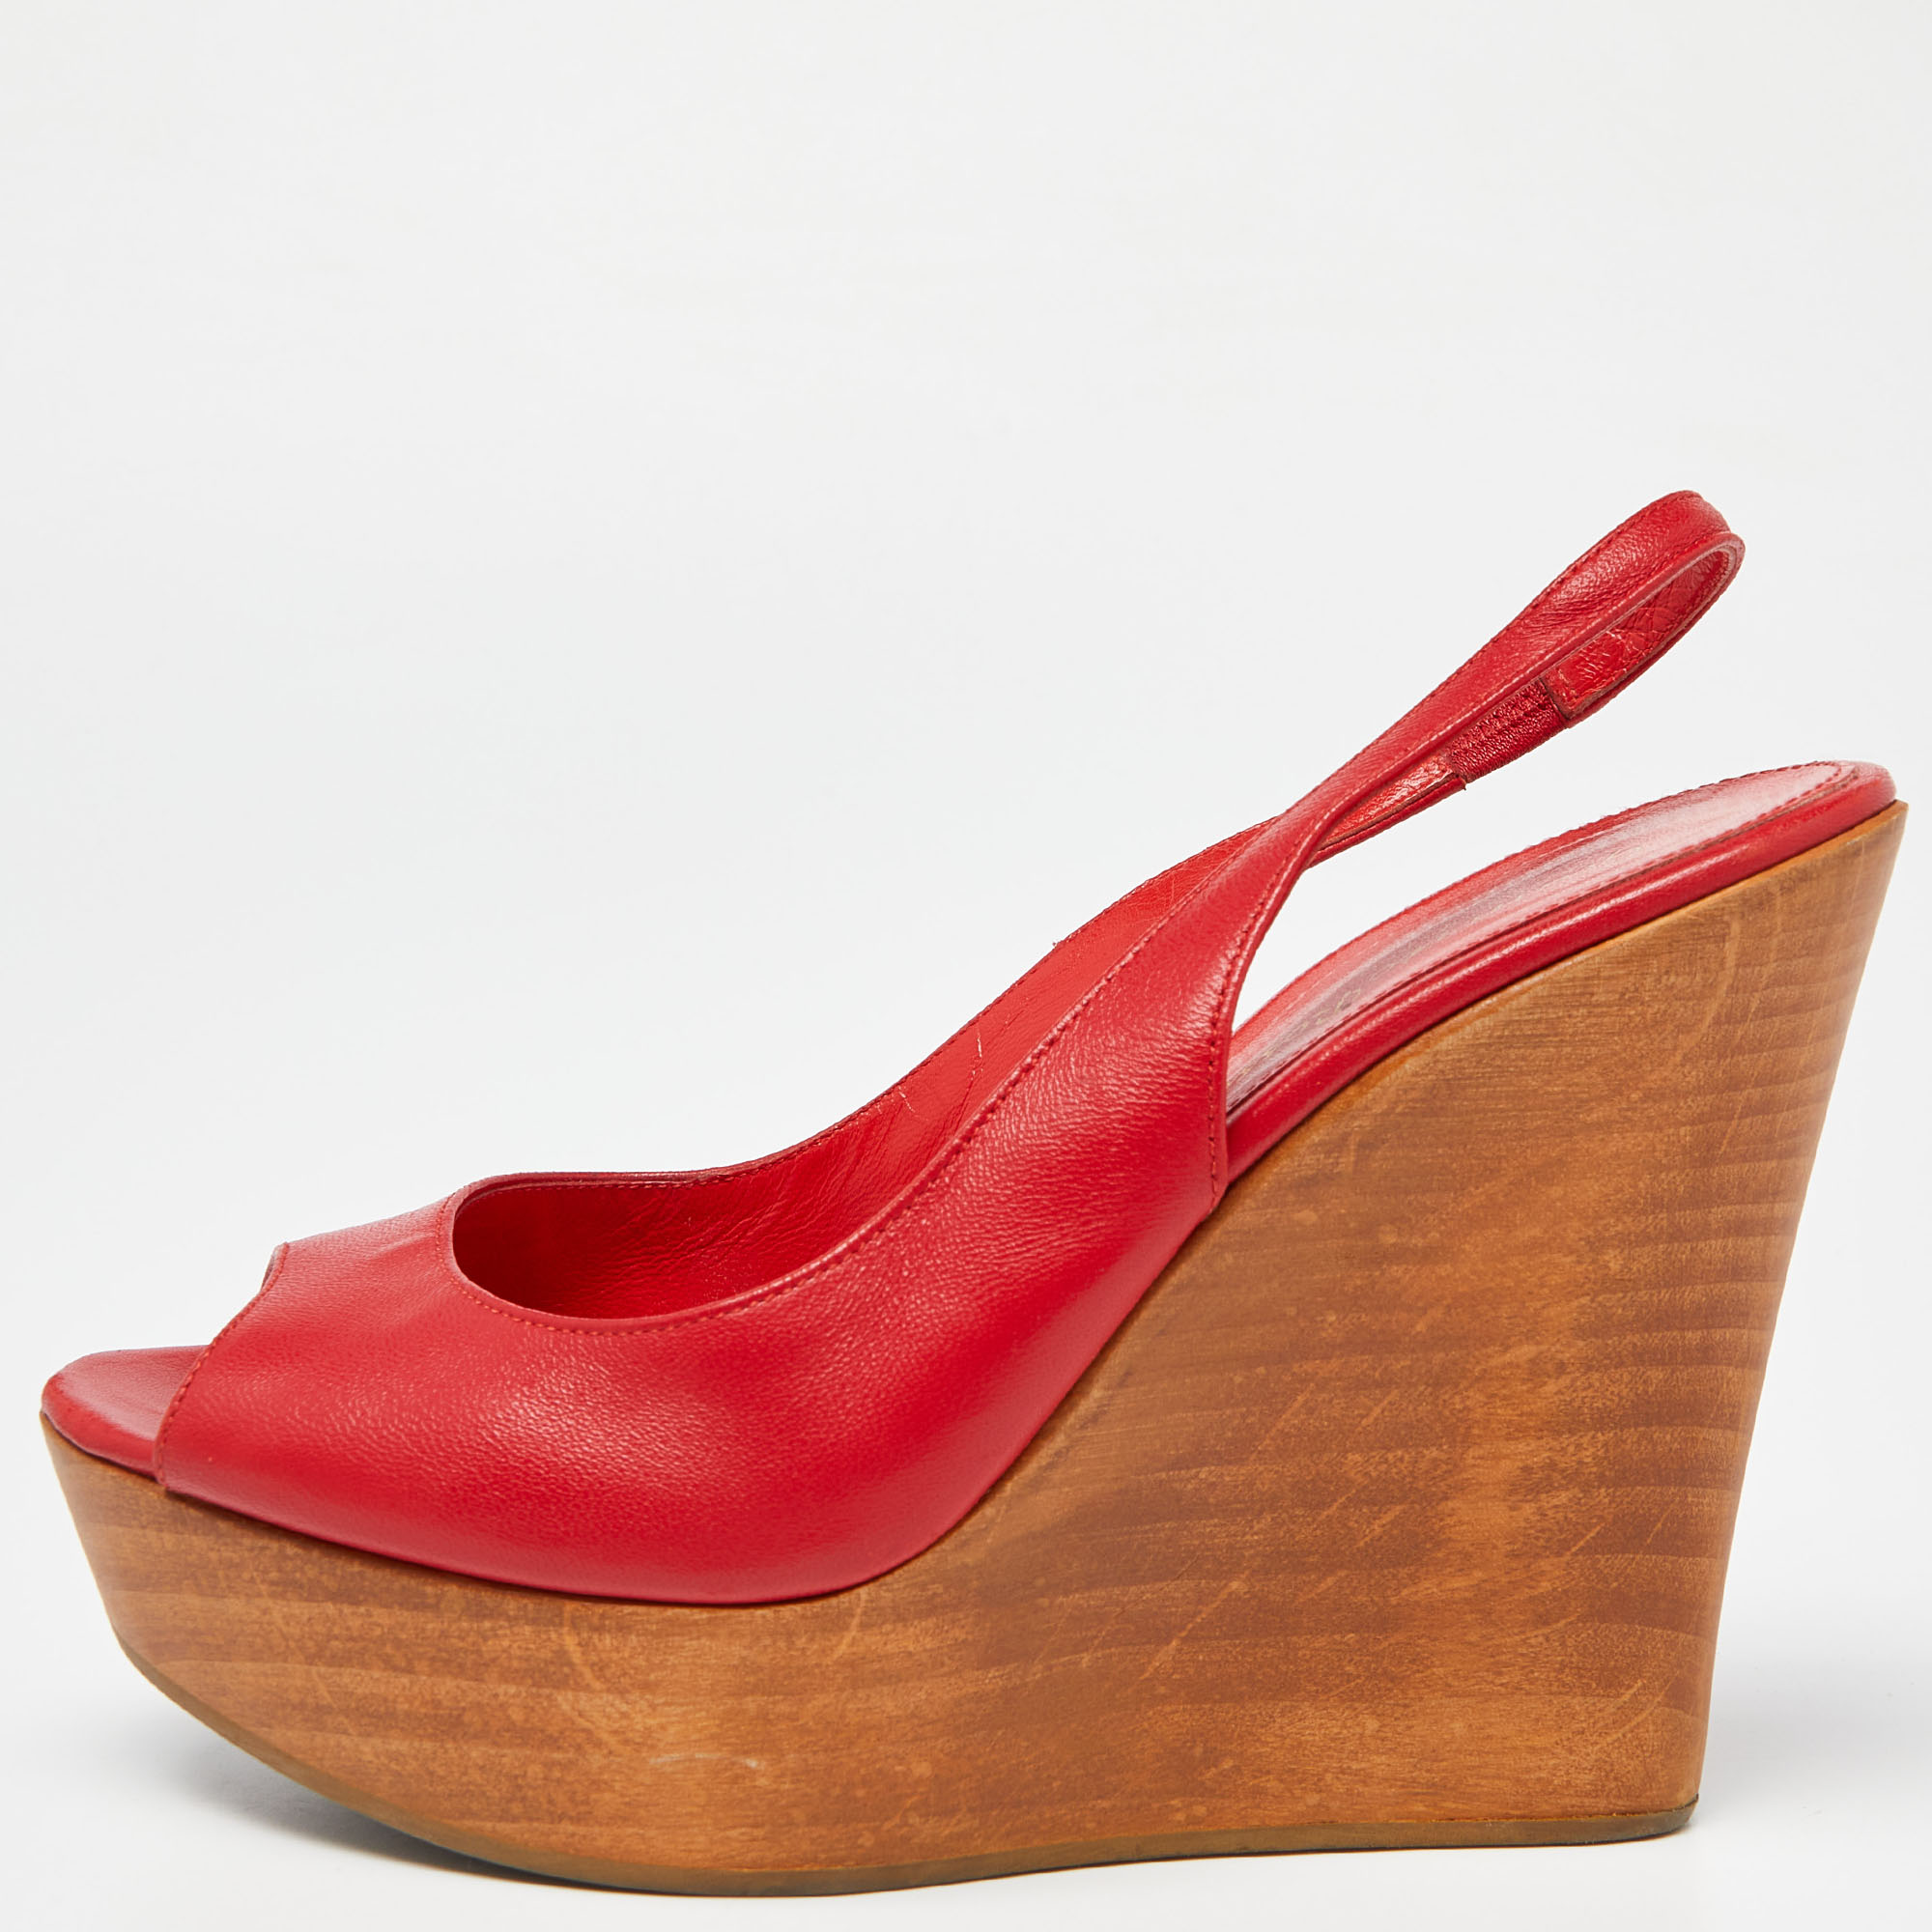 

Sergio Rossi Red Leather Platform Wedge Slingback Sandals Size